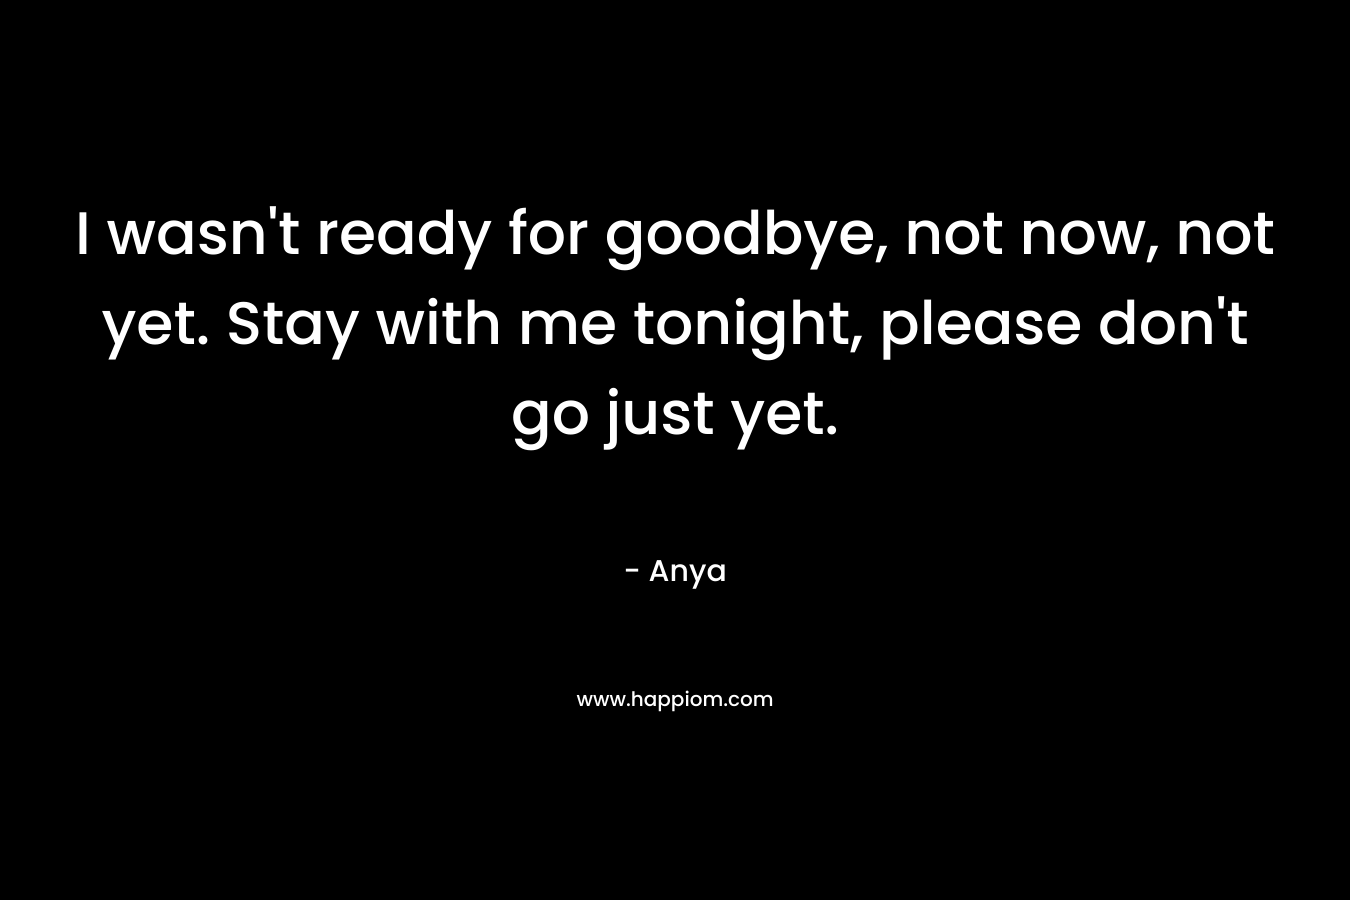 I wasn't ready for goodbye, not now, not yet. Stay with me tonight, please don't go just yet.